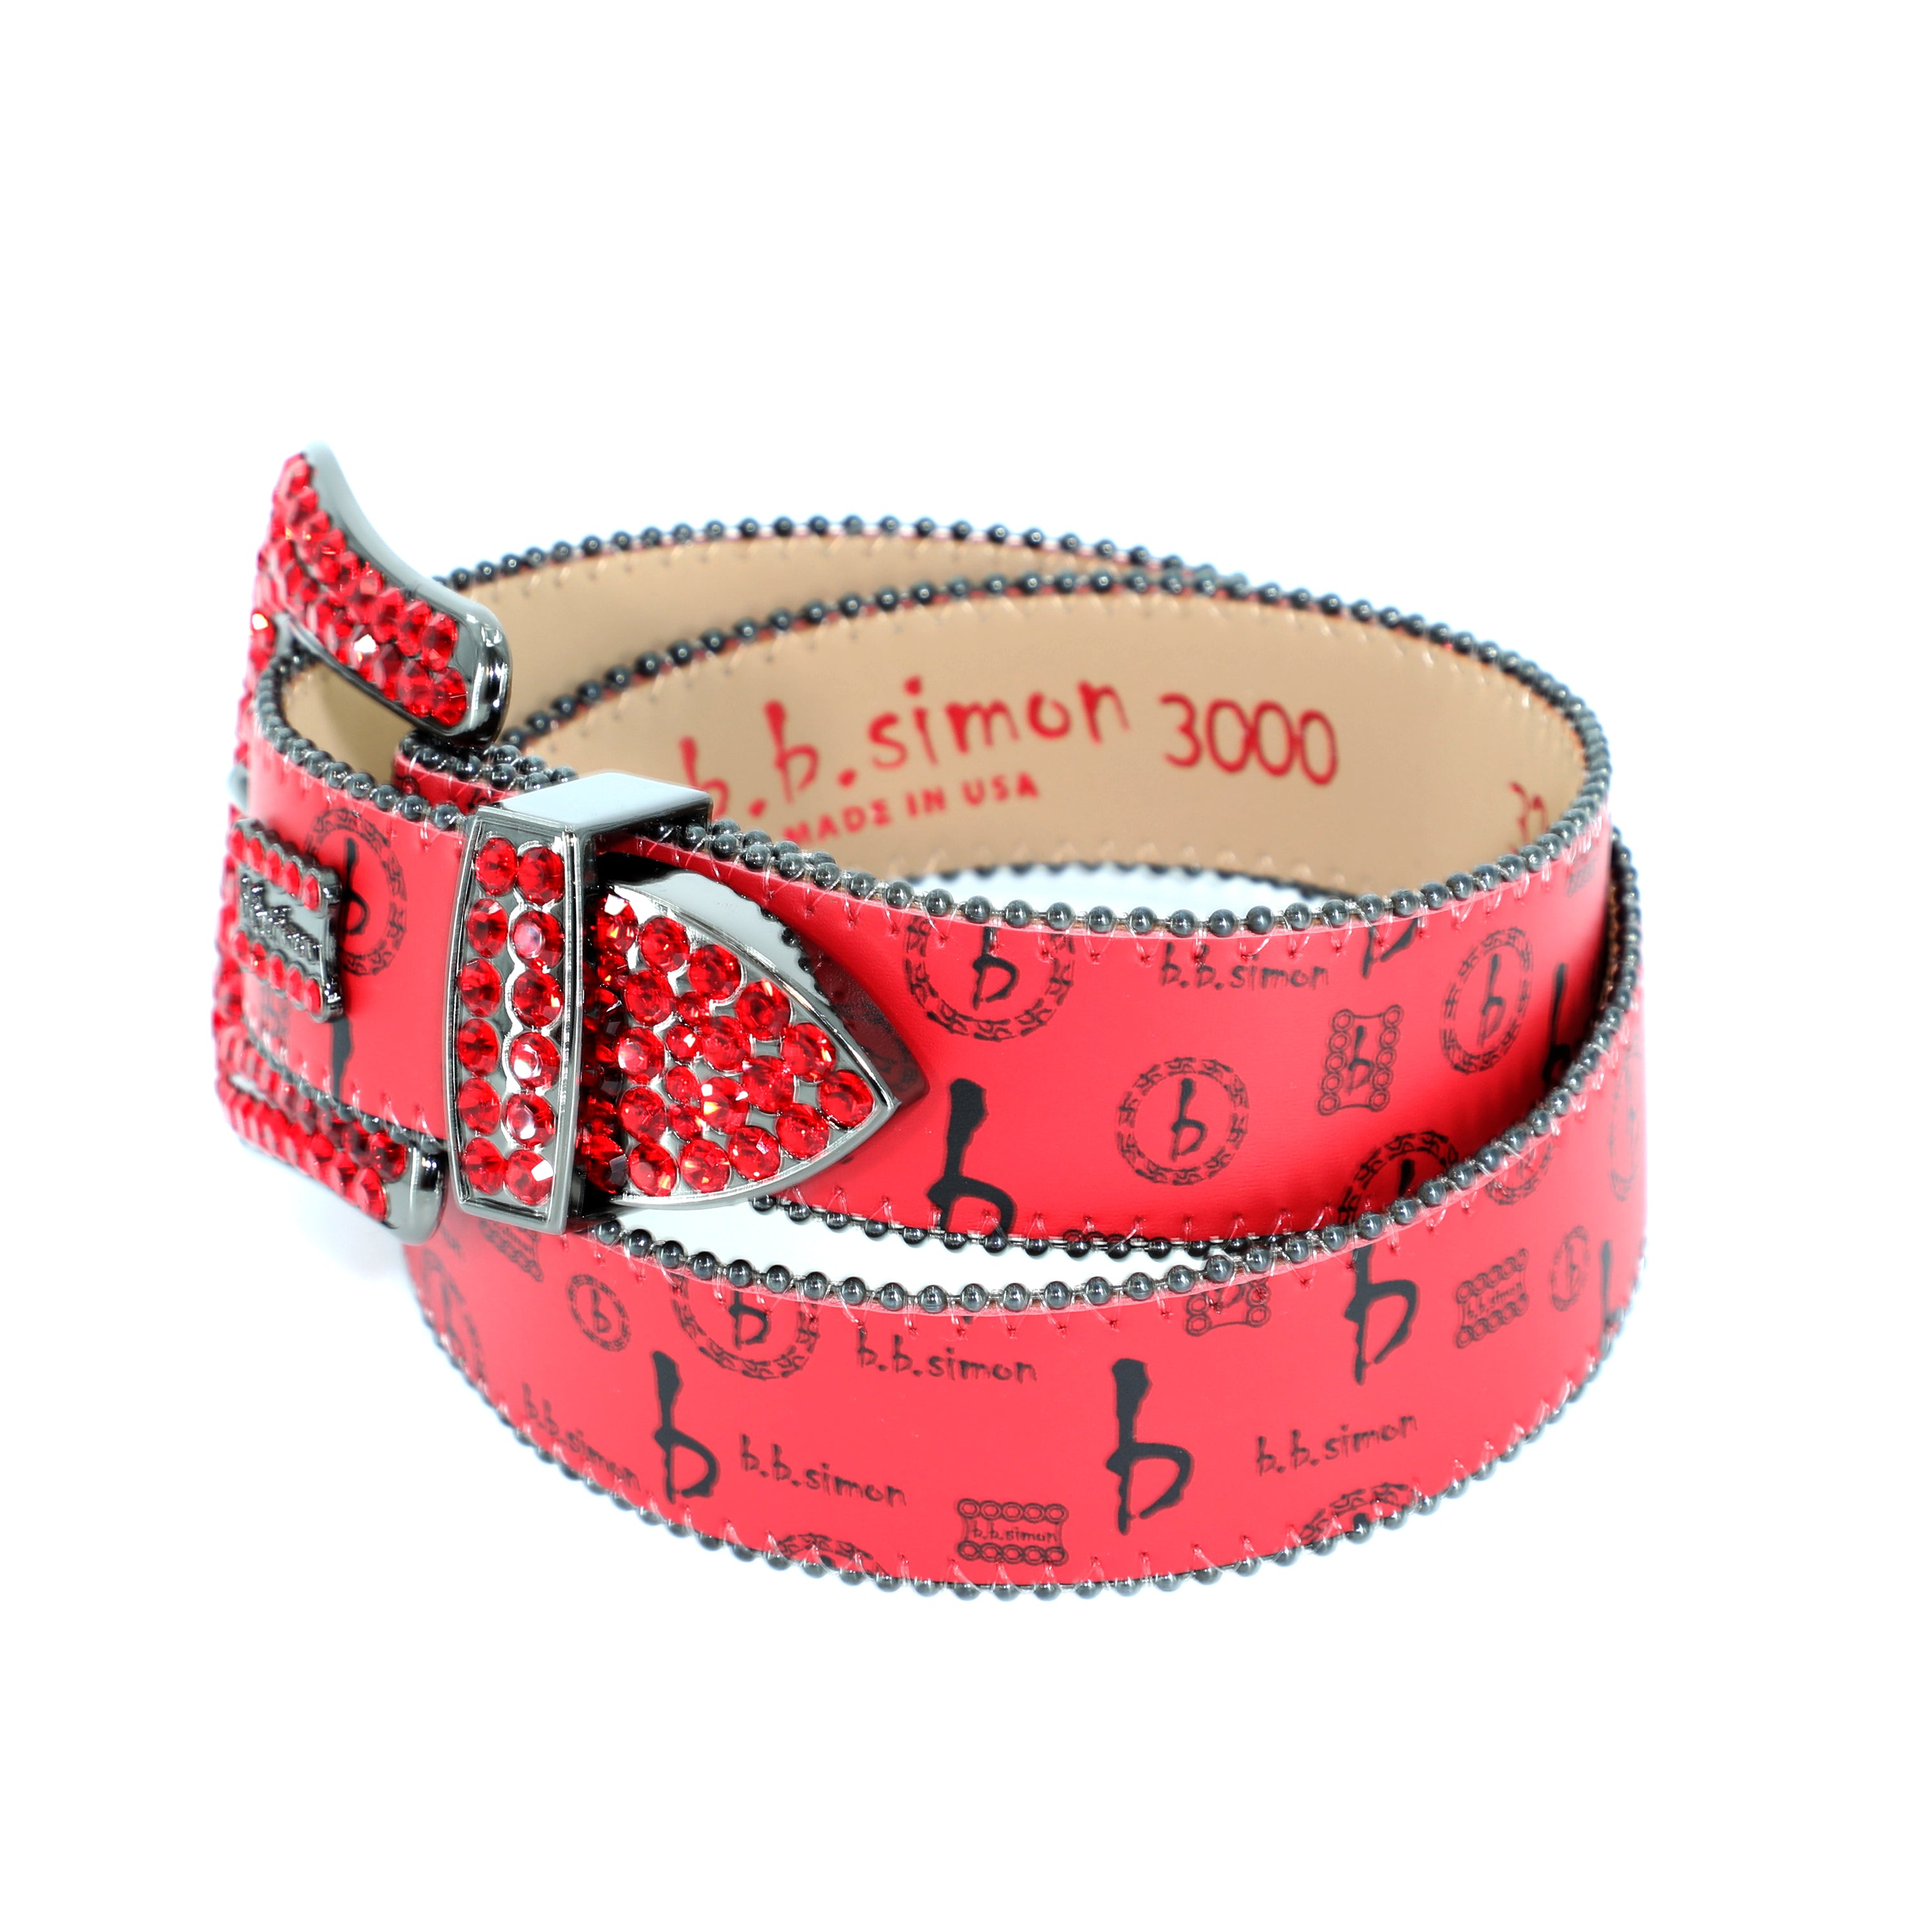 B.B Simon Red Belt w/ All Silver Crystals and Parachute Studs Red / 36